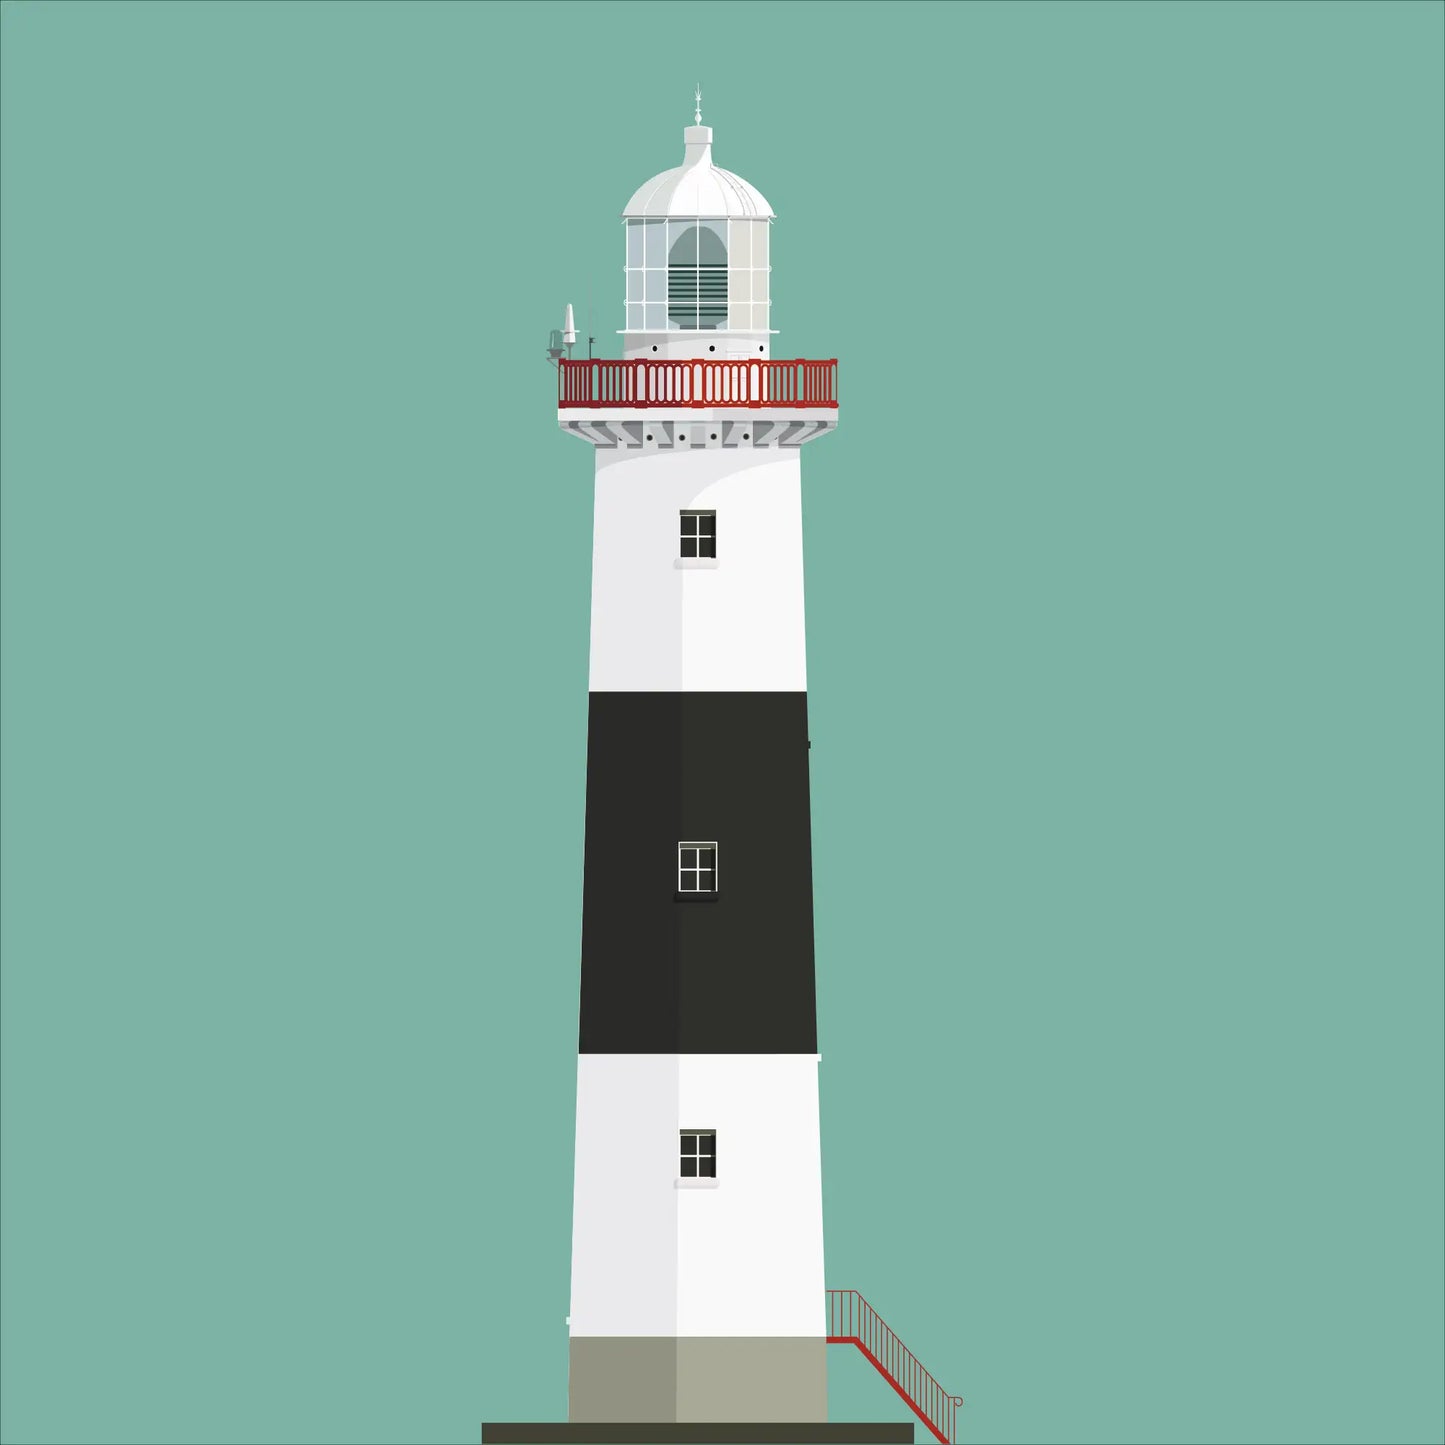 Contemporary graphic illustration of Inisheer lighthouse on a white background inside light blue square.